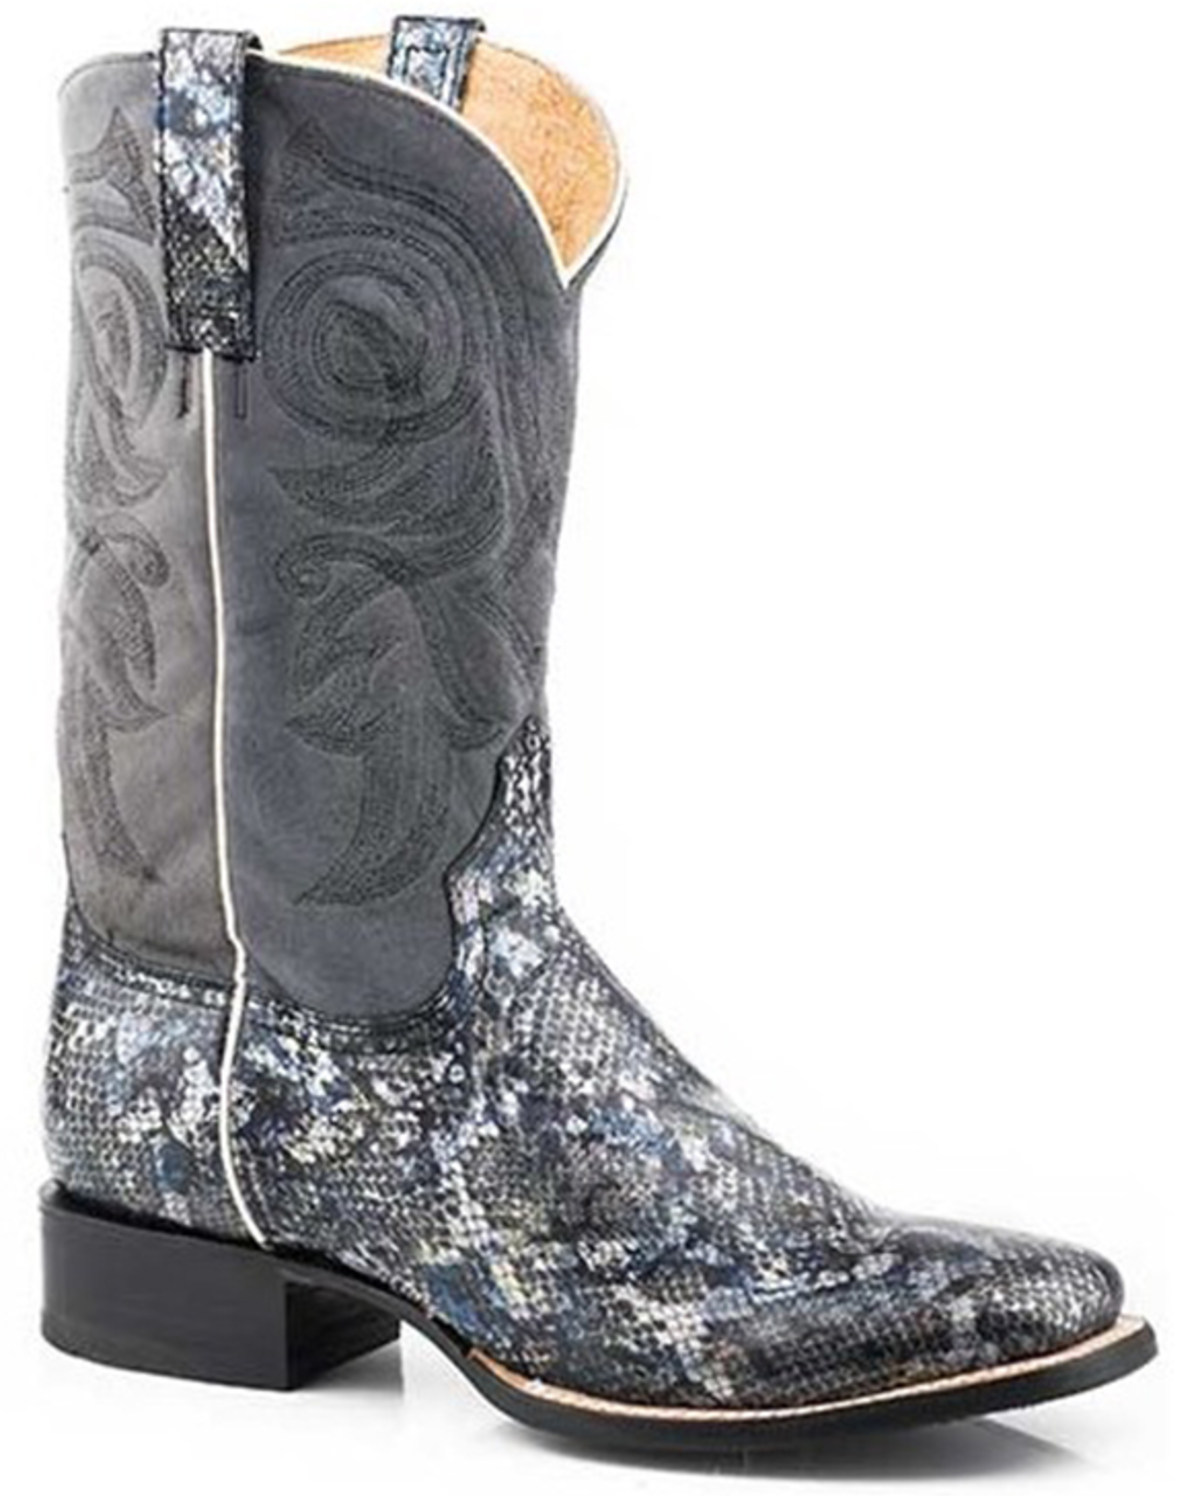 Roper Women's Perle Python Print Western Boots - Broad Square Toe